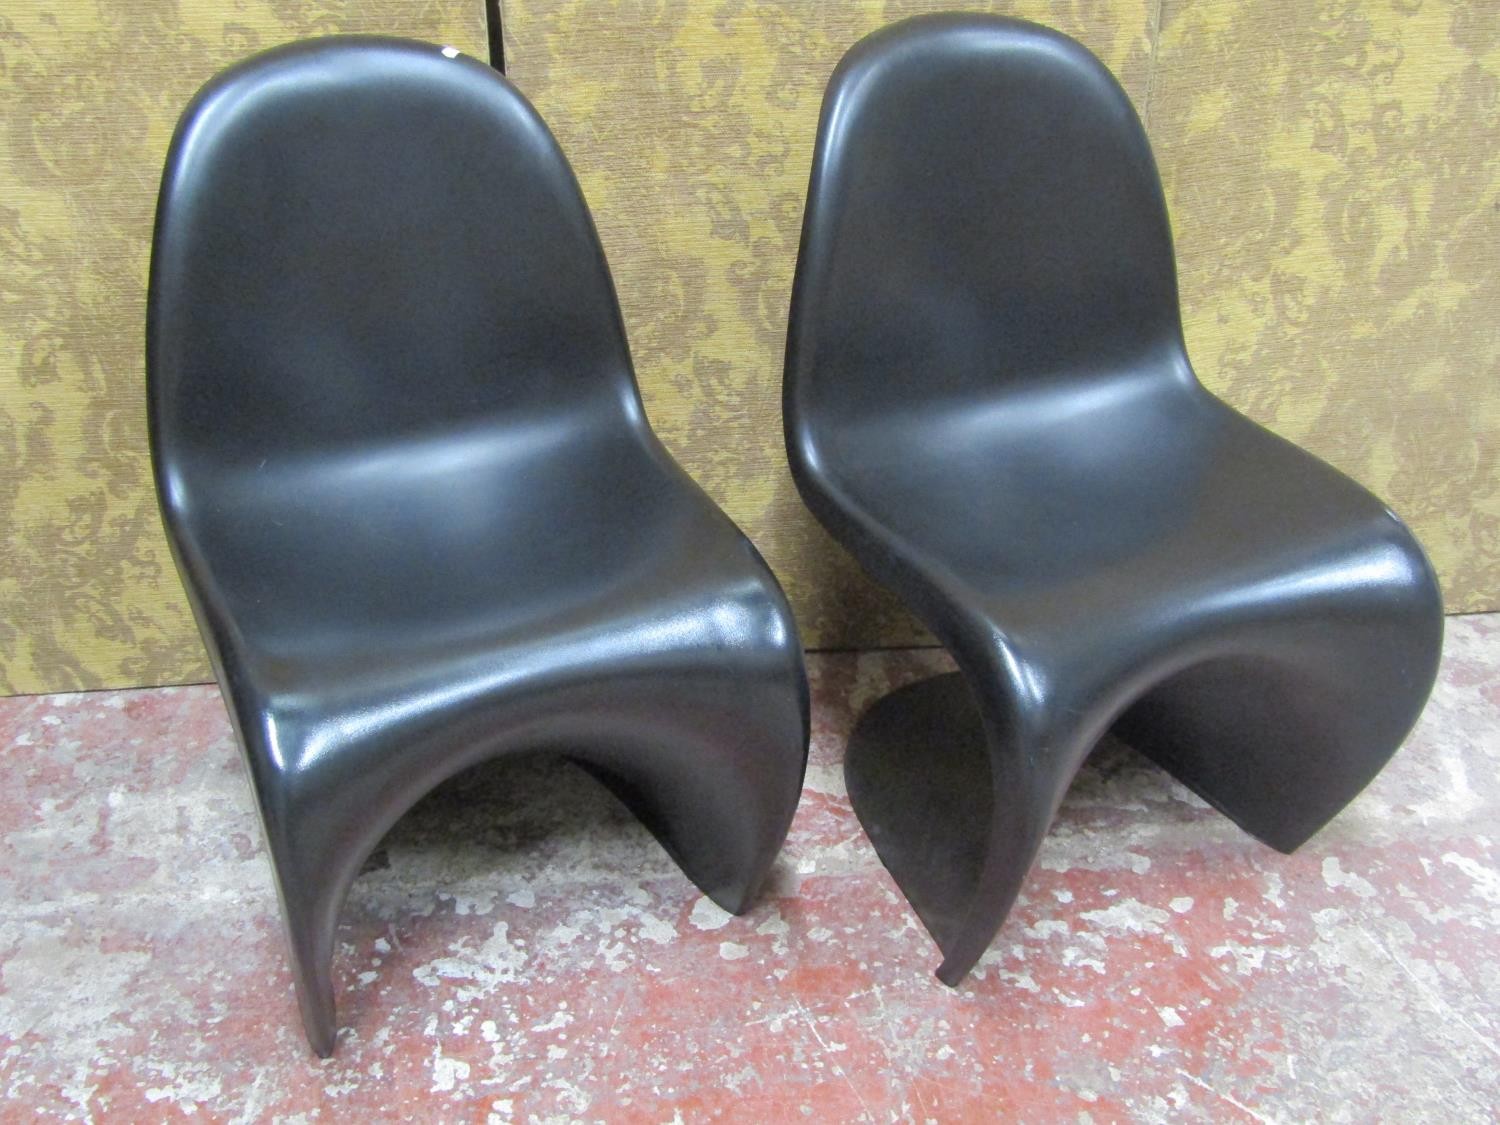 A pair of contemporary moulded plastic cantilever chairs in a black colourway in stacking format